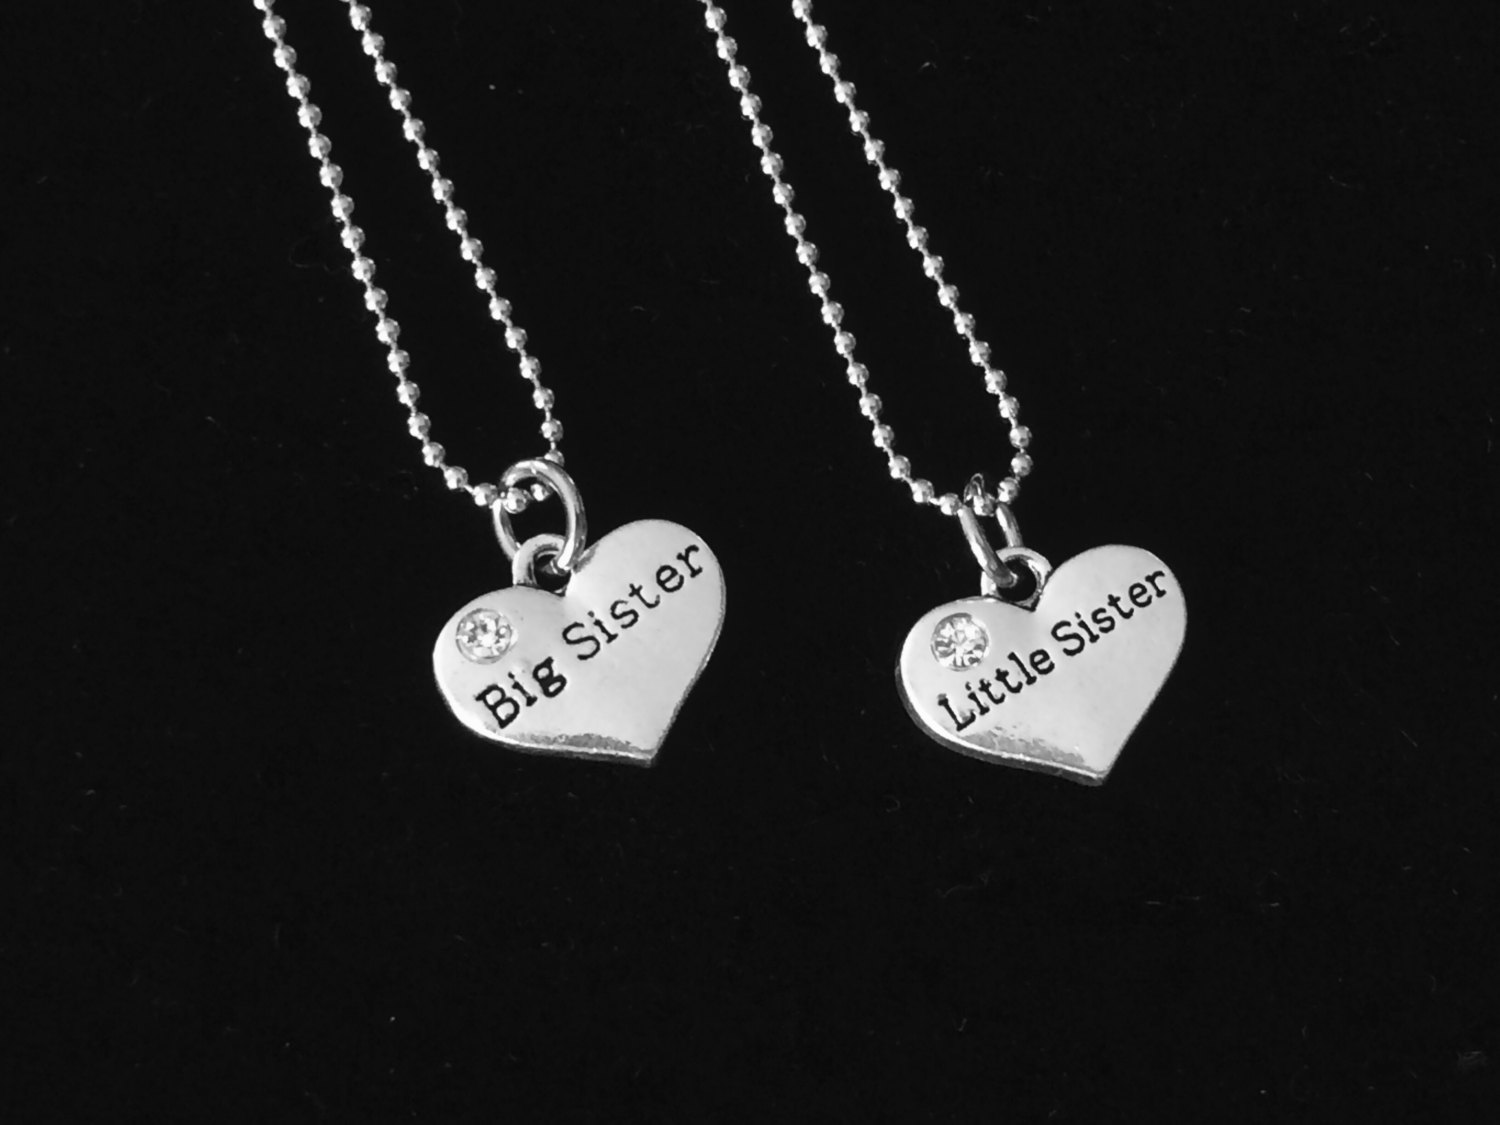 Pendant Necklaces Mom Big Sister Little Necklace Family Jewelry Special  Gift For Mommy Lil Sis Party Mother Day Heart Stitching From 55,03 € |  DHgate